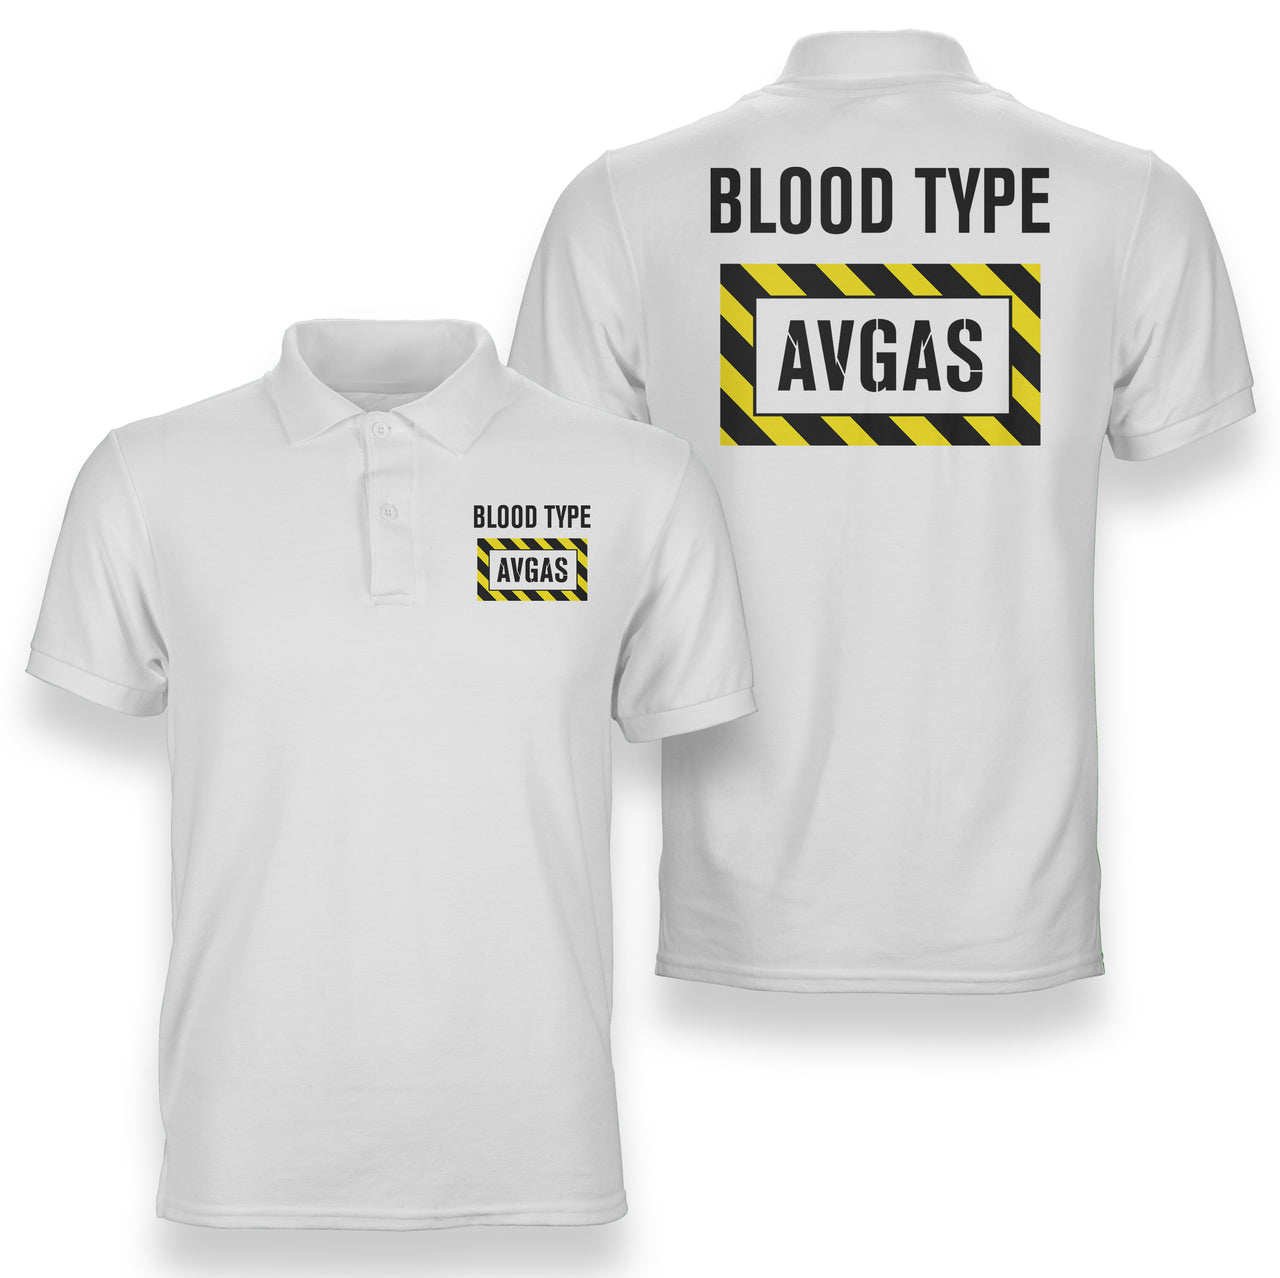 Blood Type AVGAS Designed Double Side Polo T-Shirts